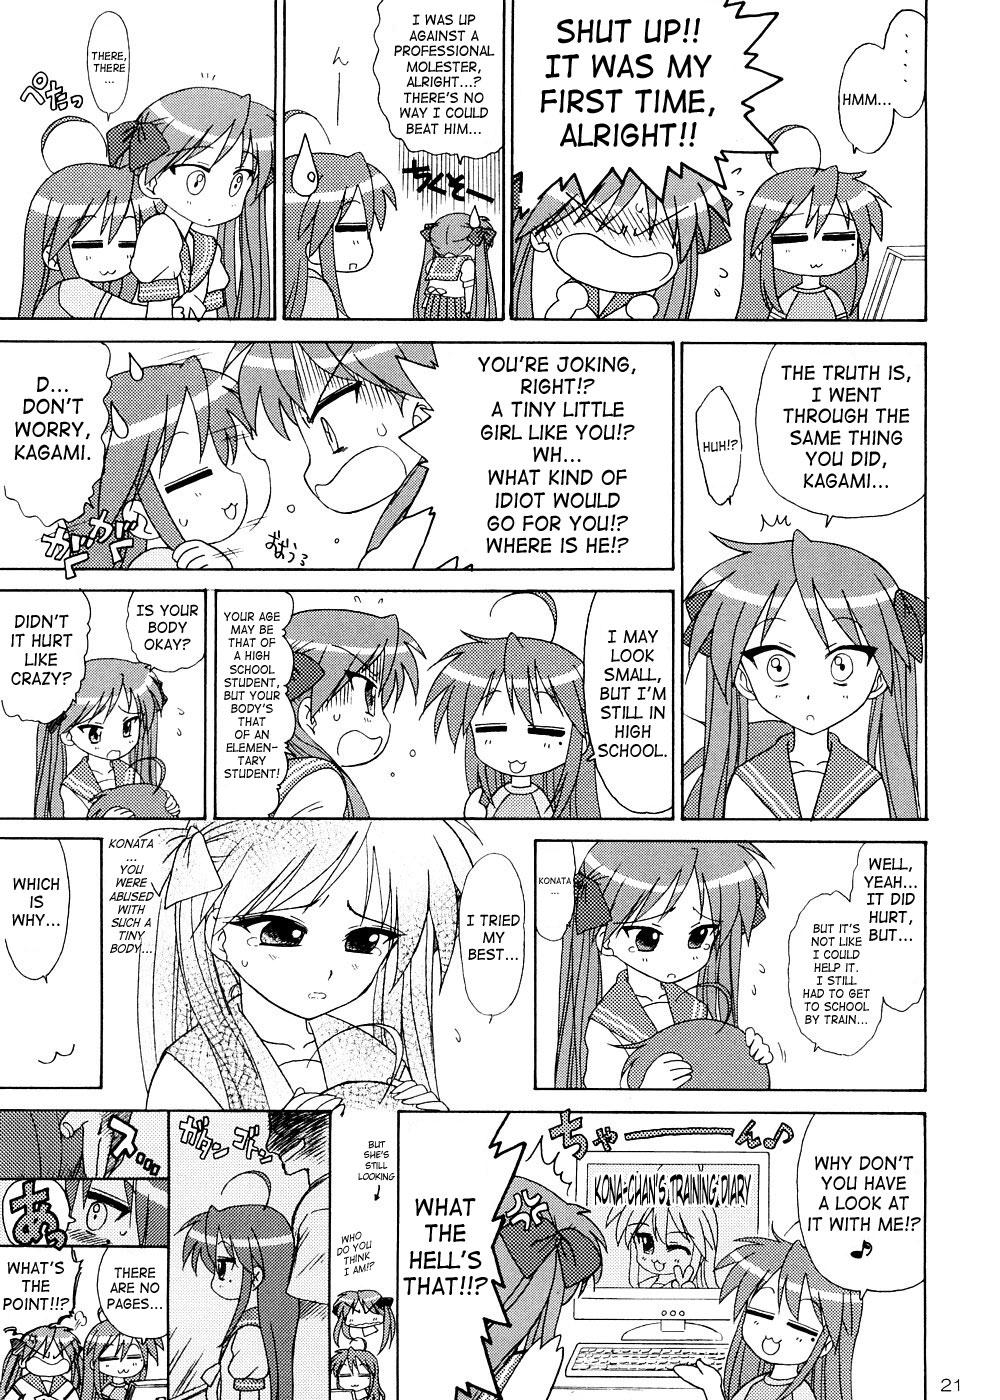 Best Blowjobs Man in the Mirror - Lucky star Fisting - Page 20